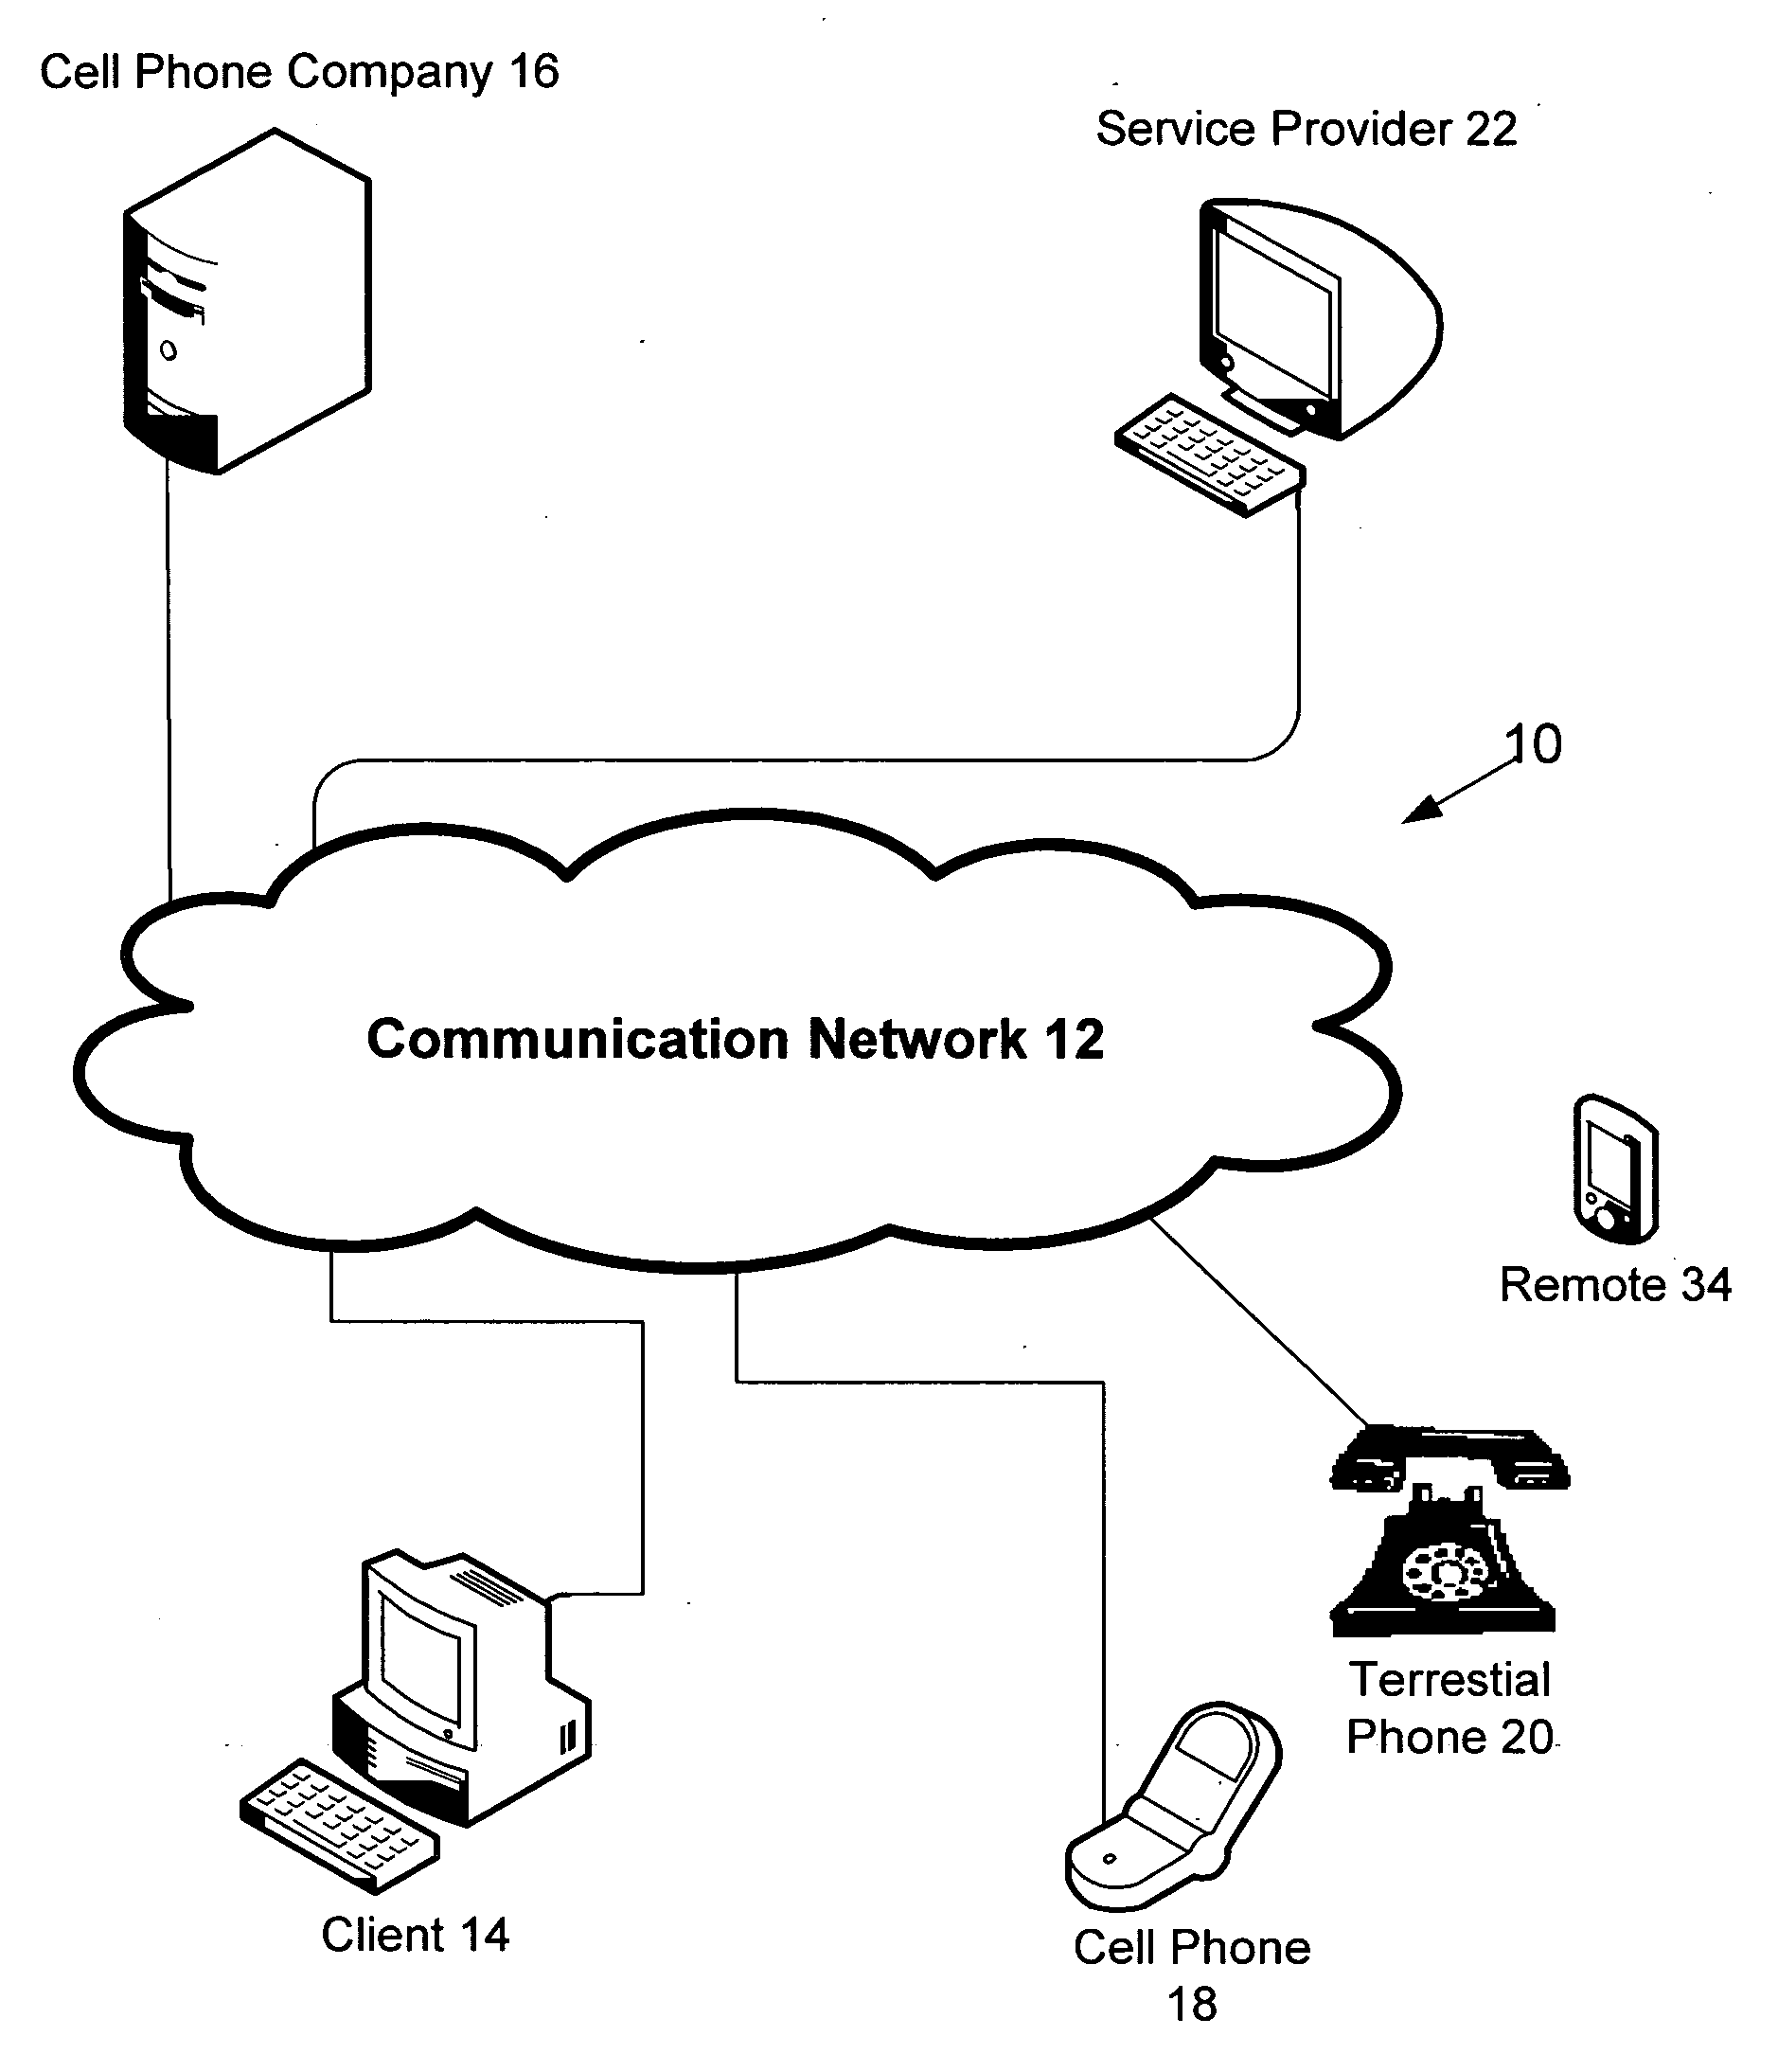 System and method for locating a misplaced cellular telephone